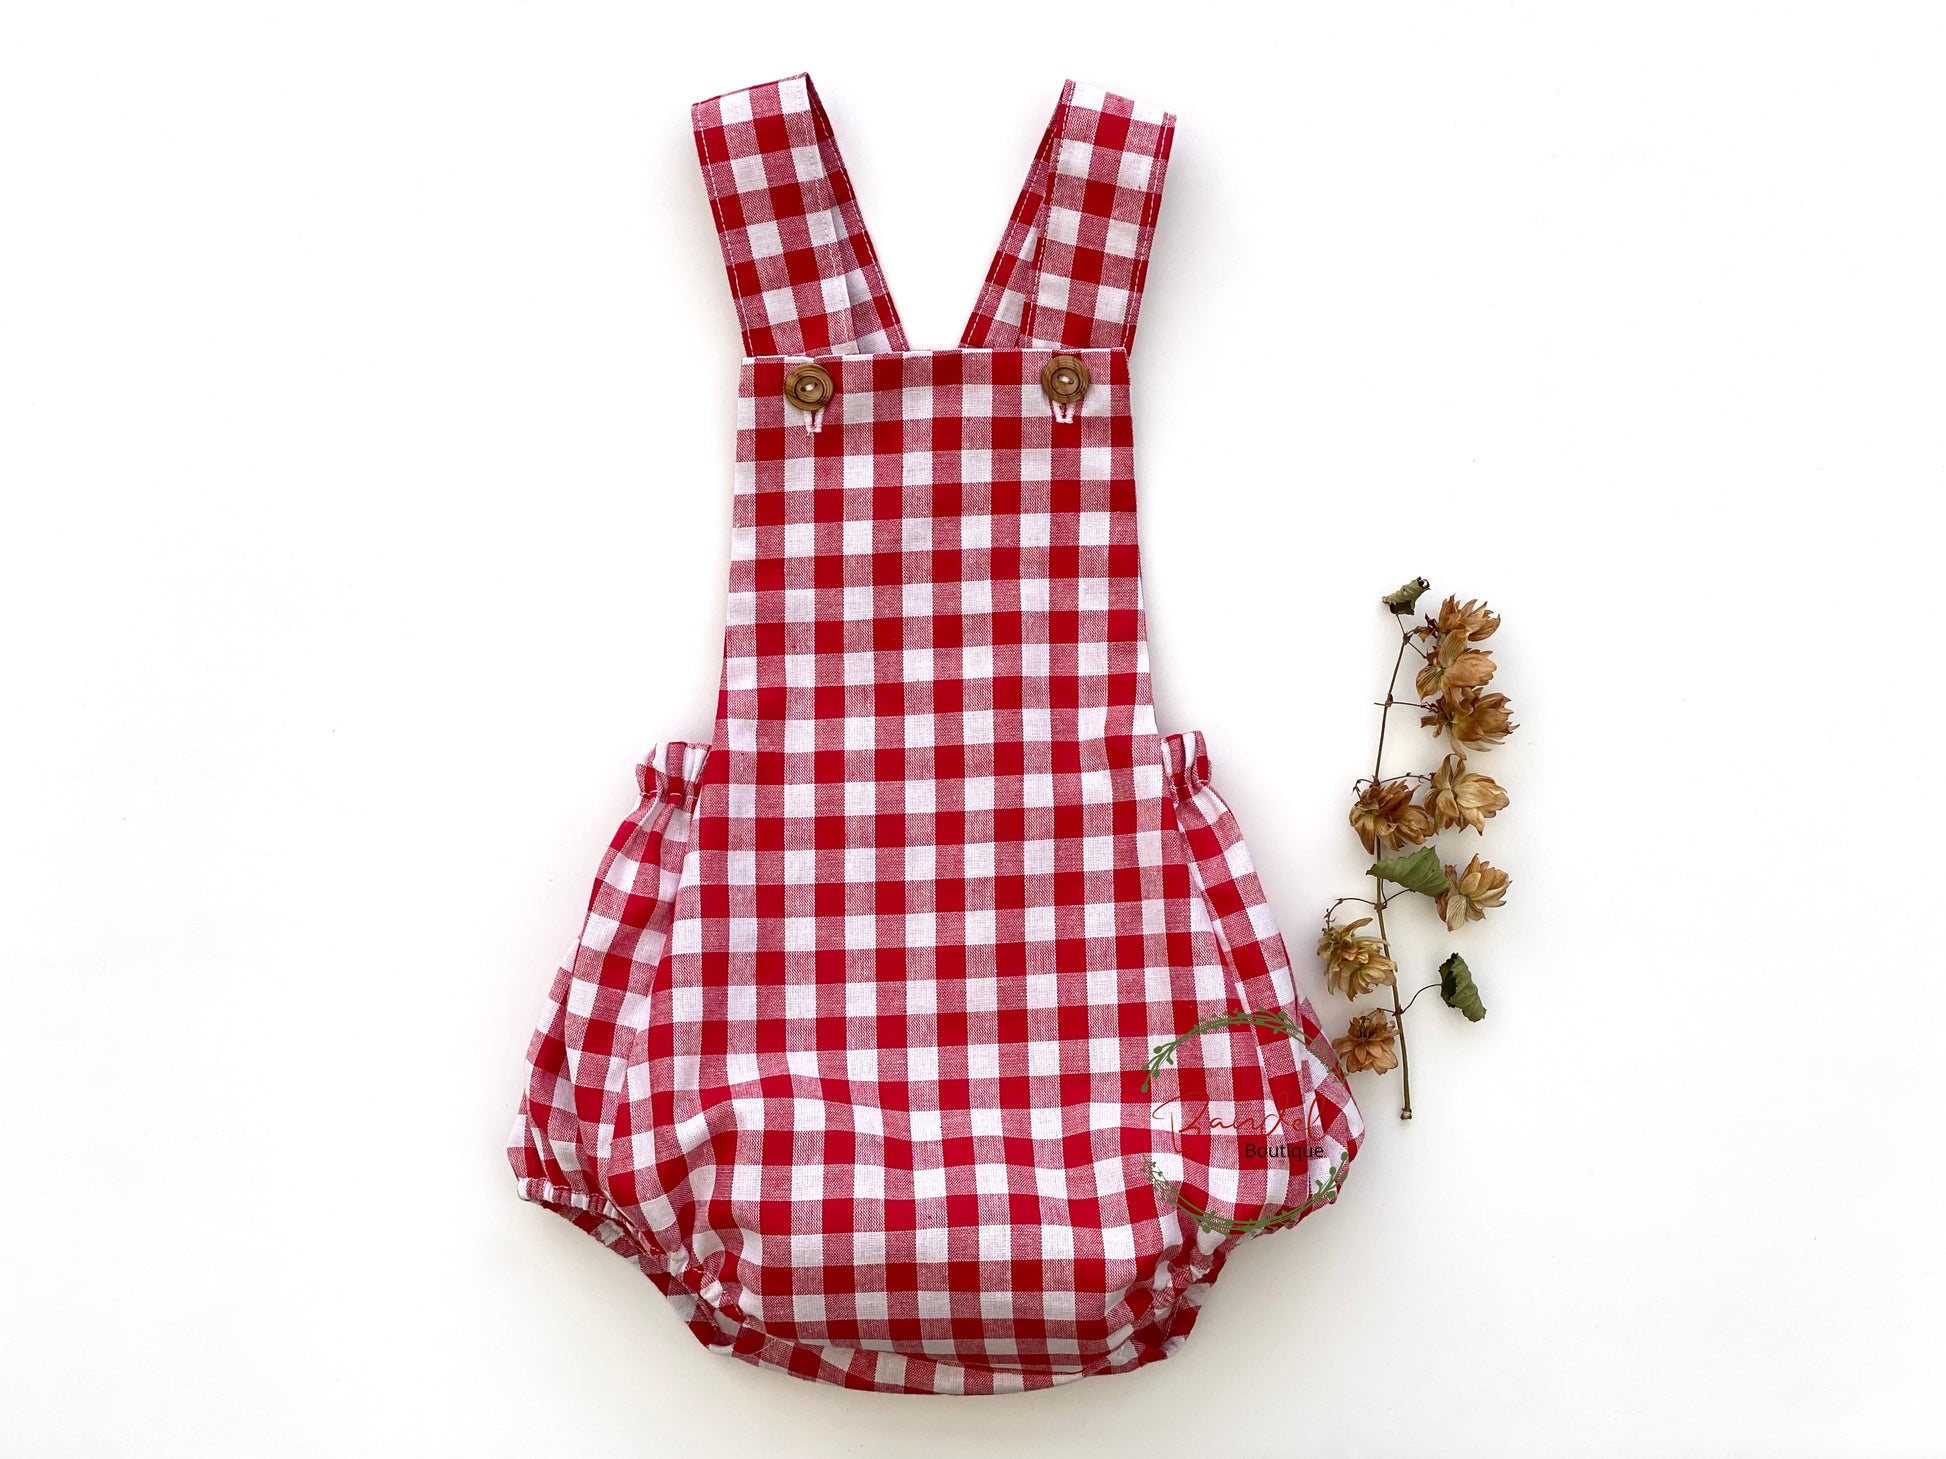 Stay comfortable and stylish this holiday season in our Red Check Cotton Baby Romper. This piece features shoulder straps with front wooden button closure, an elastic back waistband, and leg openings to ensure a great fit. Be festive and look your best this holiday season.